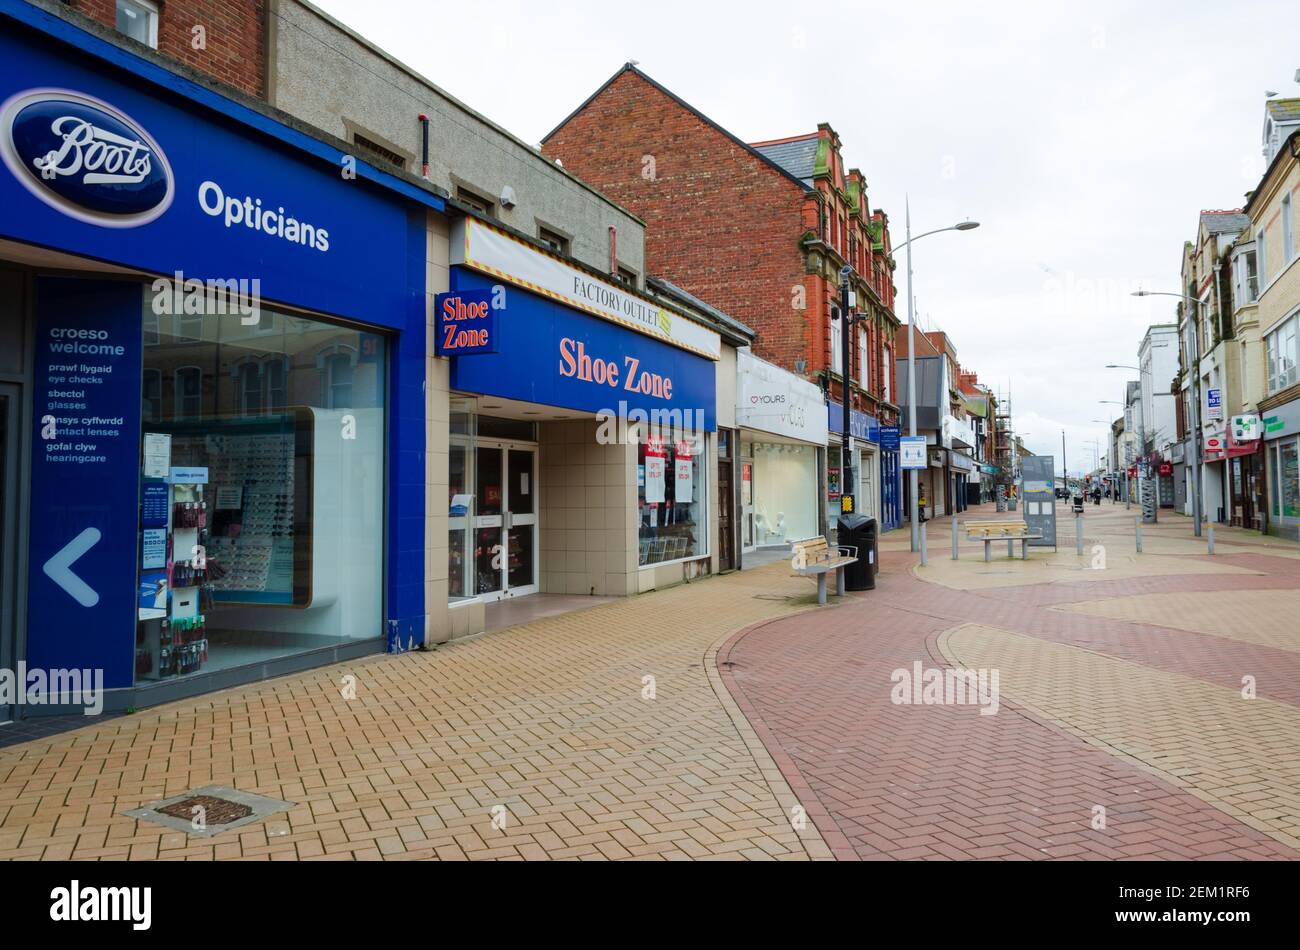 Rhyl, Denbighshire; UK: Feb 21, 2021: A general scene of the High Street on a Sunday afternoon during the pandemic lockdown. Stock Photo